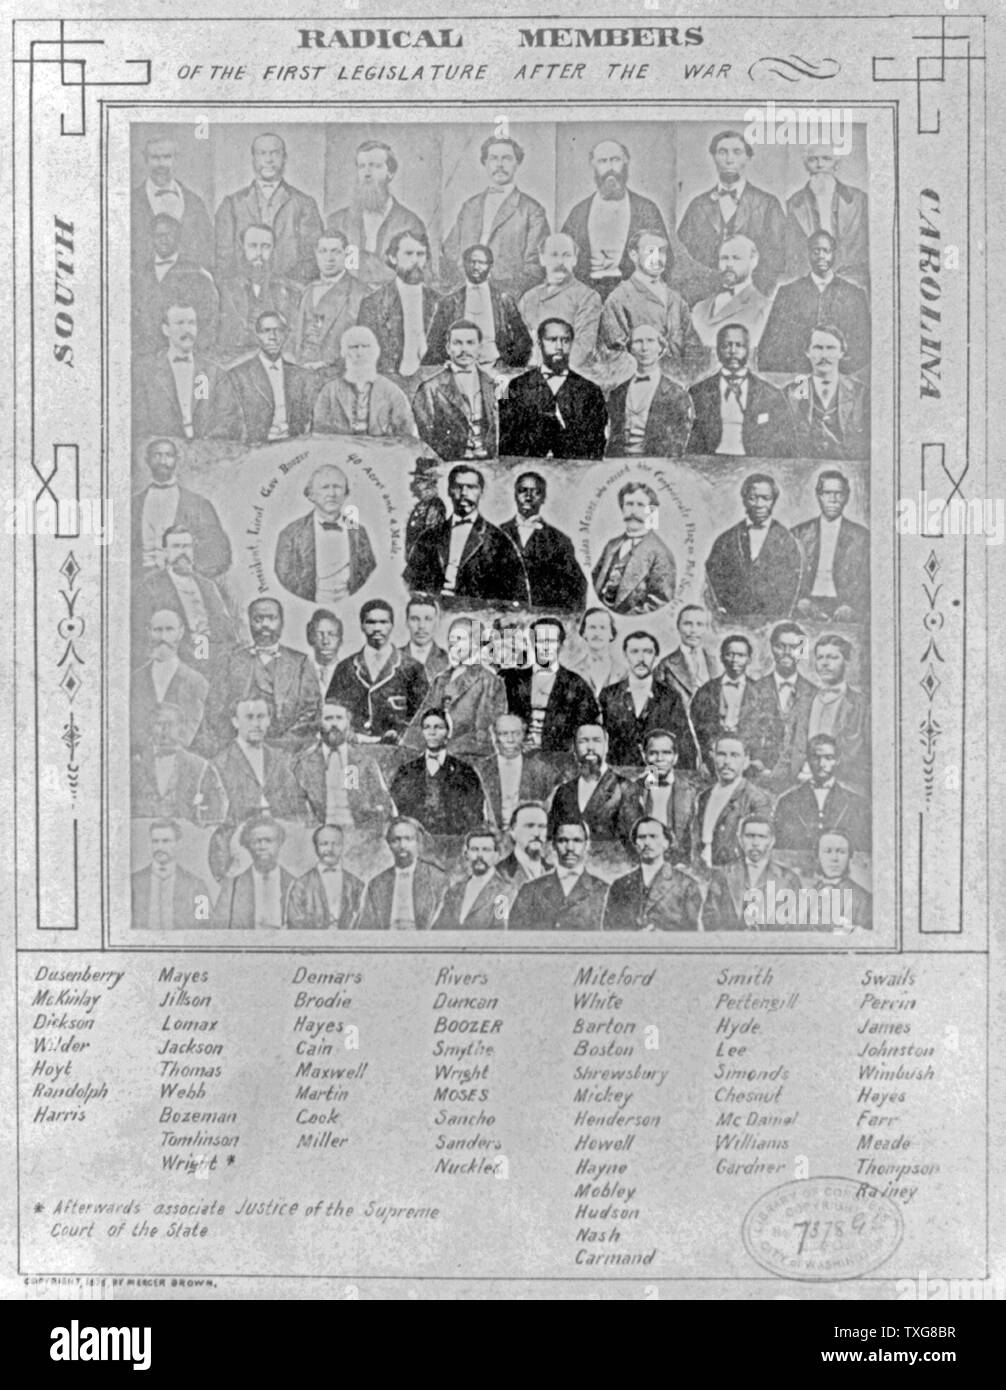 Photomontage of radical members of the first South Carolina legislature after the American Civil War - Each member is  identified Stock Photo